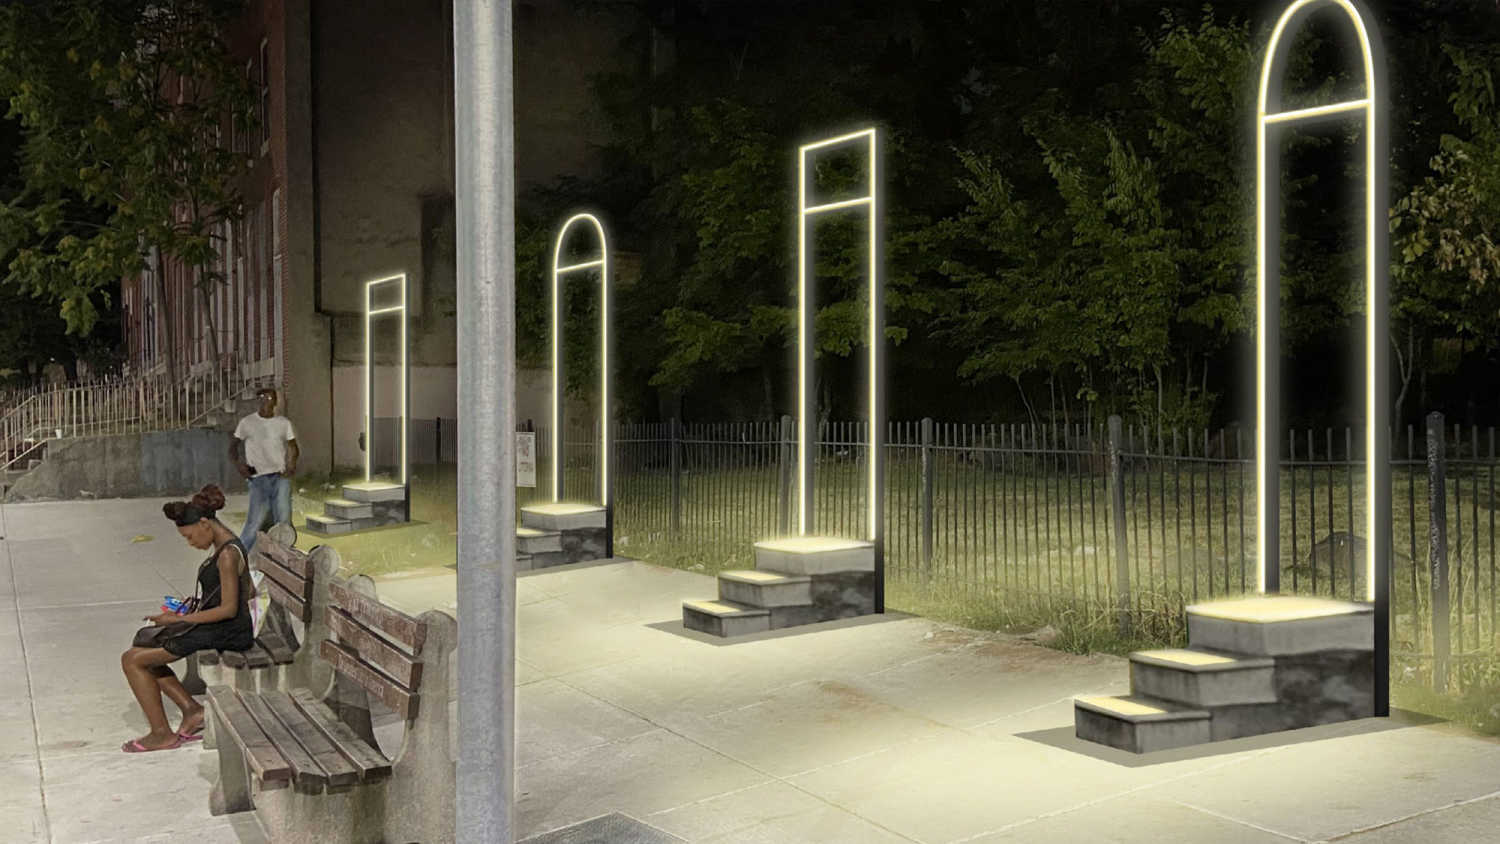 CONCEPT: GHOST STOOPS (PUBLIC MECHANICS) This public art installation proposal recalls demolished Baltimore rowhouses. Marble stoops and the glowing outlines of front doors illuminate spaces once occupied by rowhouses and generations of Baltimoreans. This poetic installation is meant to activate empty lots across the District and provide opportunities for seating and gathering.